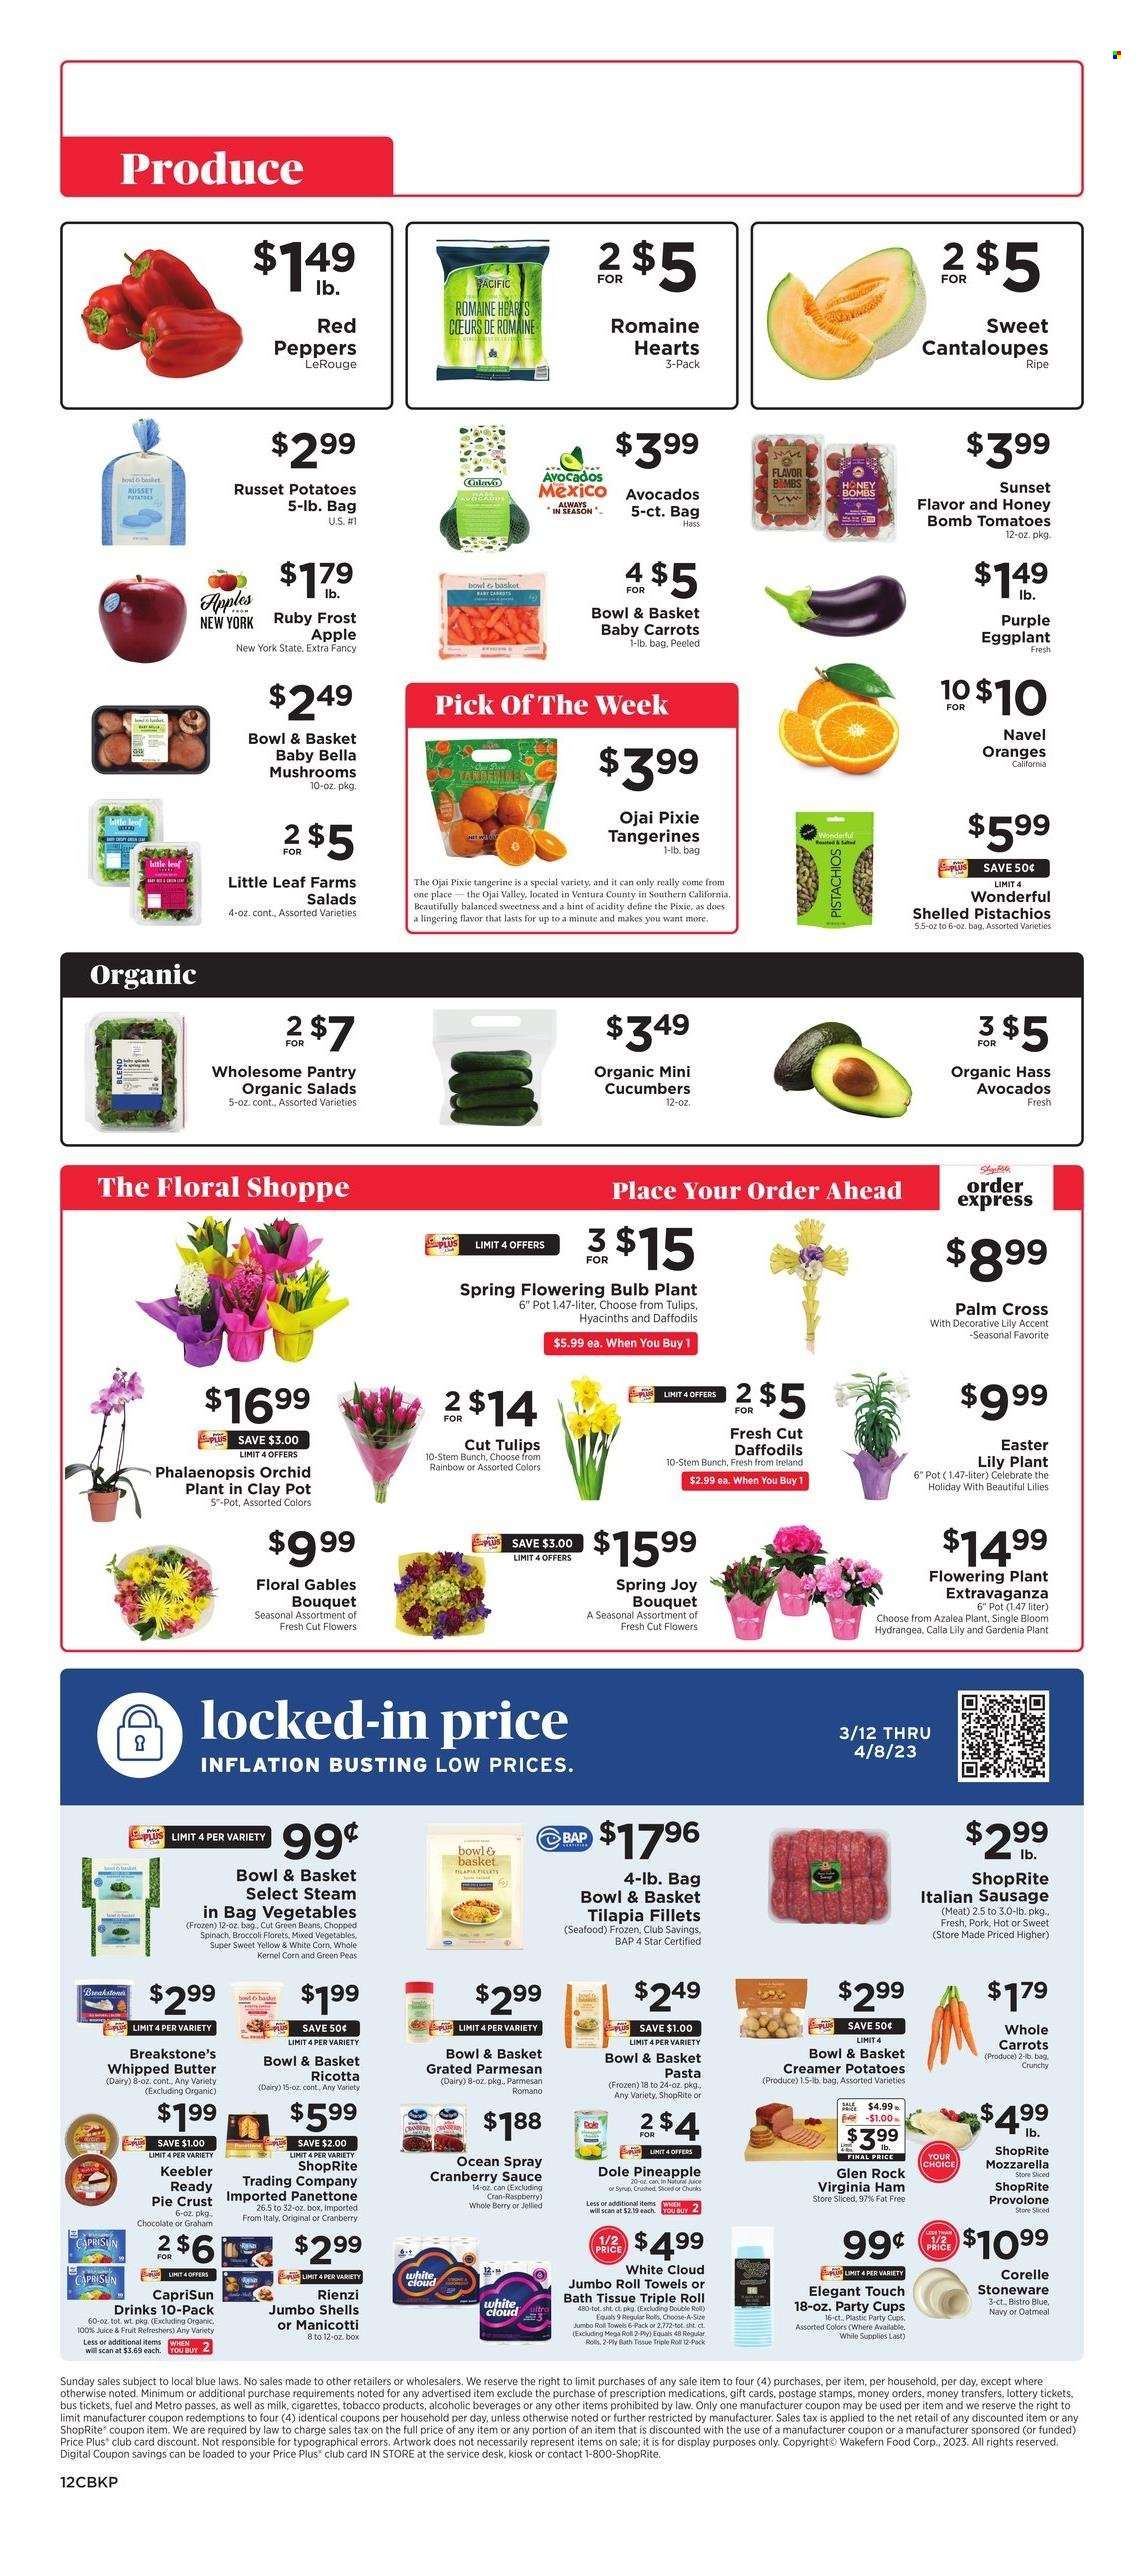 thumbnail - ShopRite Flyer - 03/26/2023 - 04/01/2023 - Sales products - mushrooms, Bowl & Basket, panettone, broccoli, cantaloupe, carrots, corn, cucumber, green beans, russet potatoes, spinach, tomatoes, potatoes, peas, salad, Dole, peppers, eggplant, red peppers, apples, avocado, pineapple, oranges, tilapia, seafood, pasta, sauce, ham, virginia ham, sausage, italian sausage, mozzarella, ricotta, parmesan, Provolone, milk, whipped butter, mixed vegetables, chocolate, Keebler, pie crust, oatmeal, cranberry sauce, honey, pistachios, juice, bath tissue, paper towels, Joy, pot, cup, stoneware, party cups, bulb, tulip, bouquet, daffodil, flowers, lily, tangerines, navel oranges. Page 12.